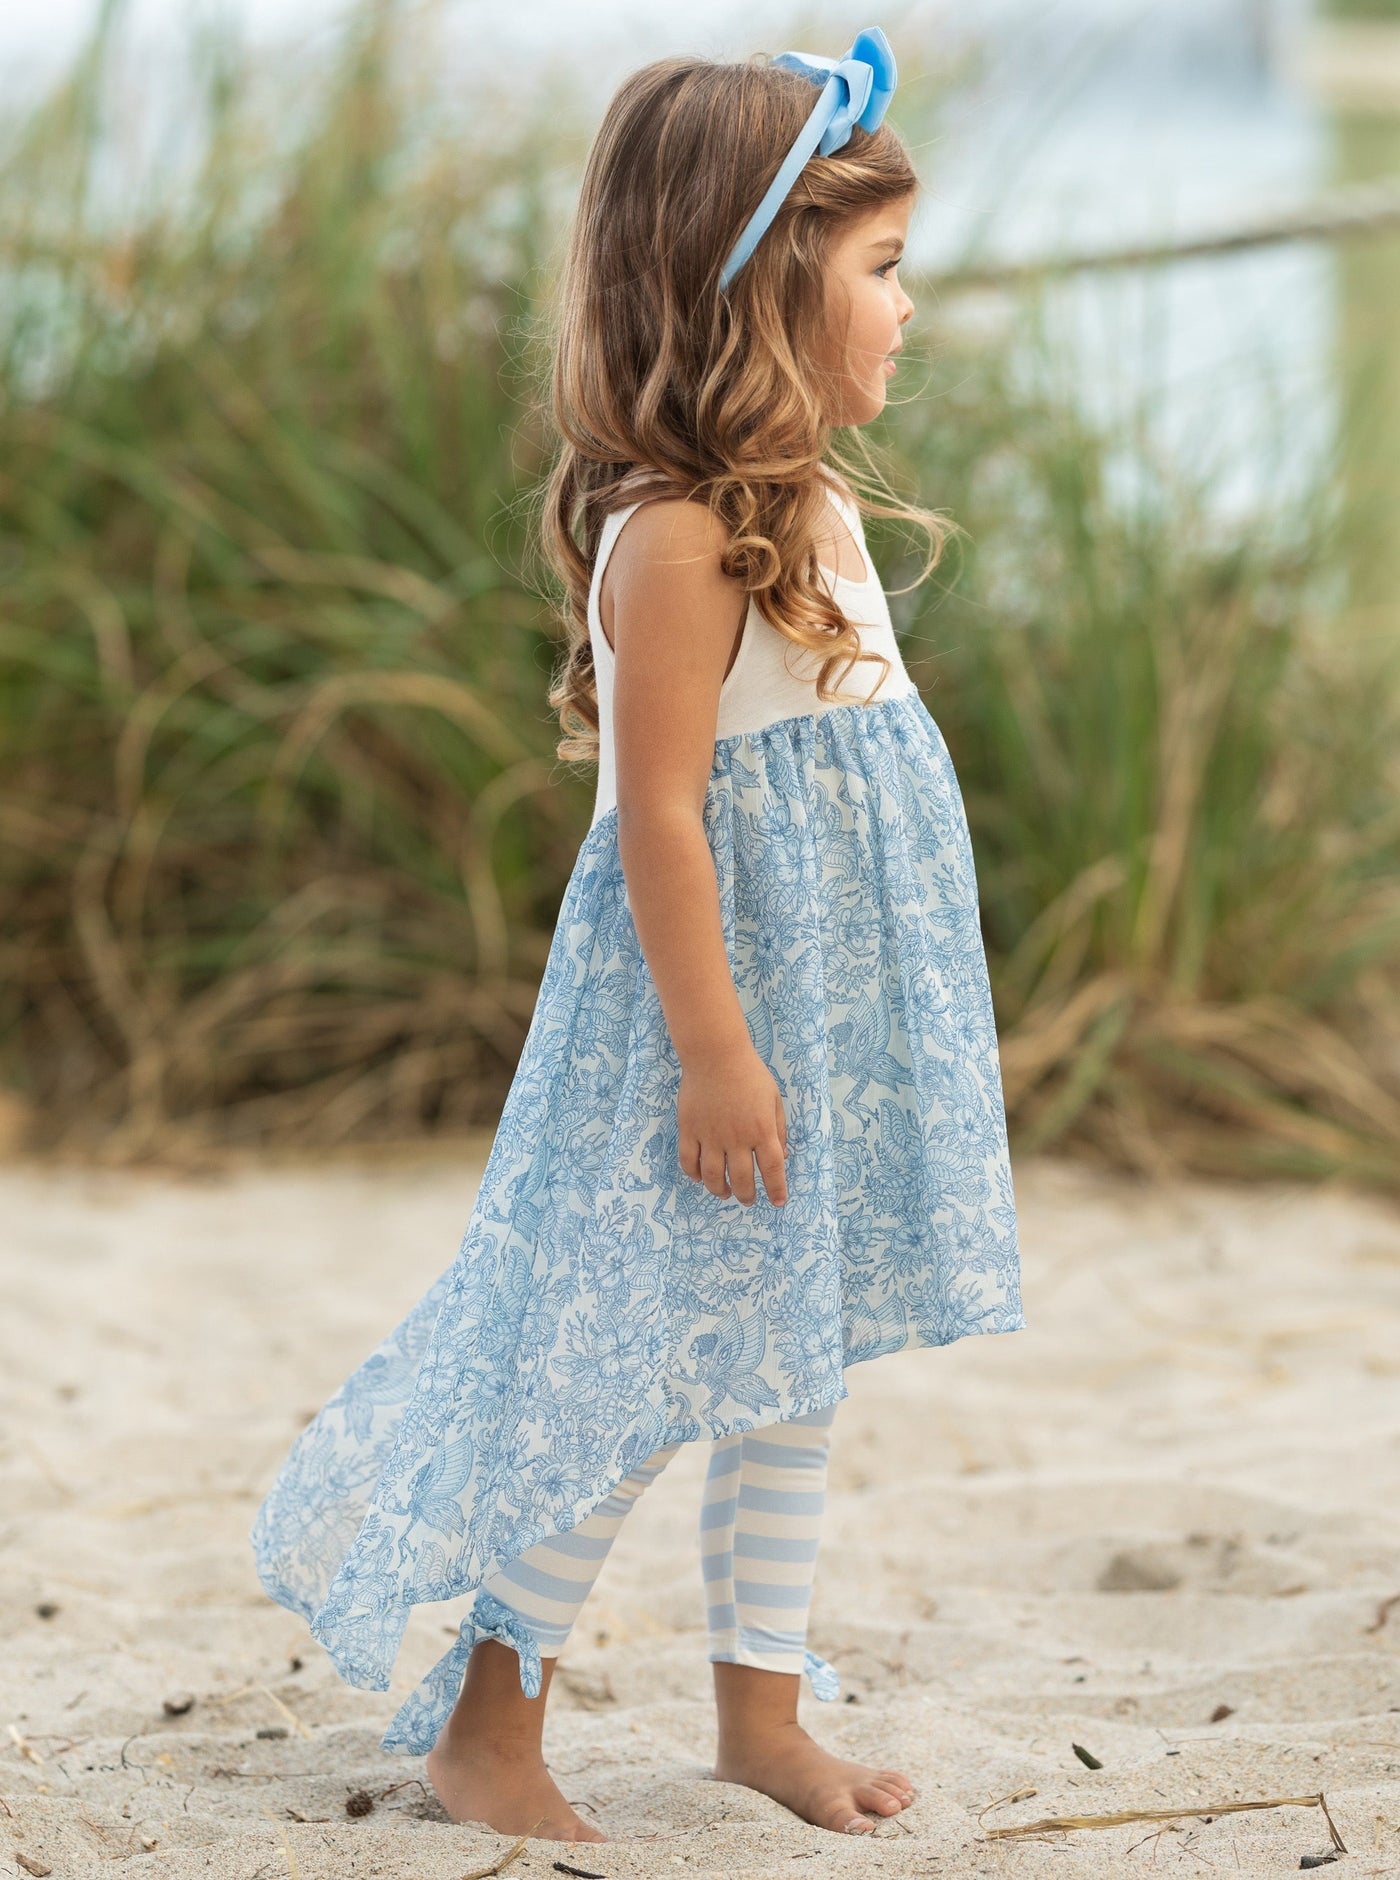 Mia Belle Girls Tunic And Striped Legging Set | Girls Spring Outfits